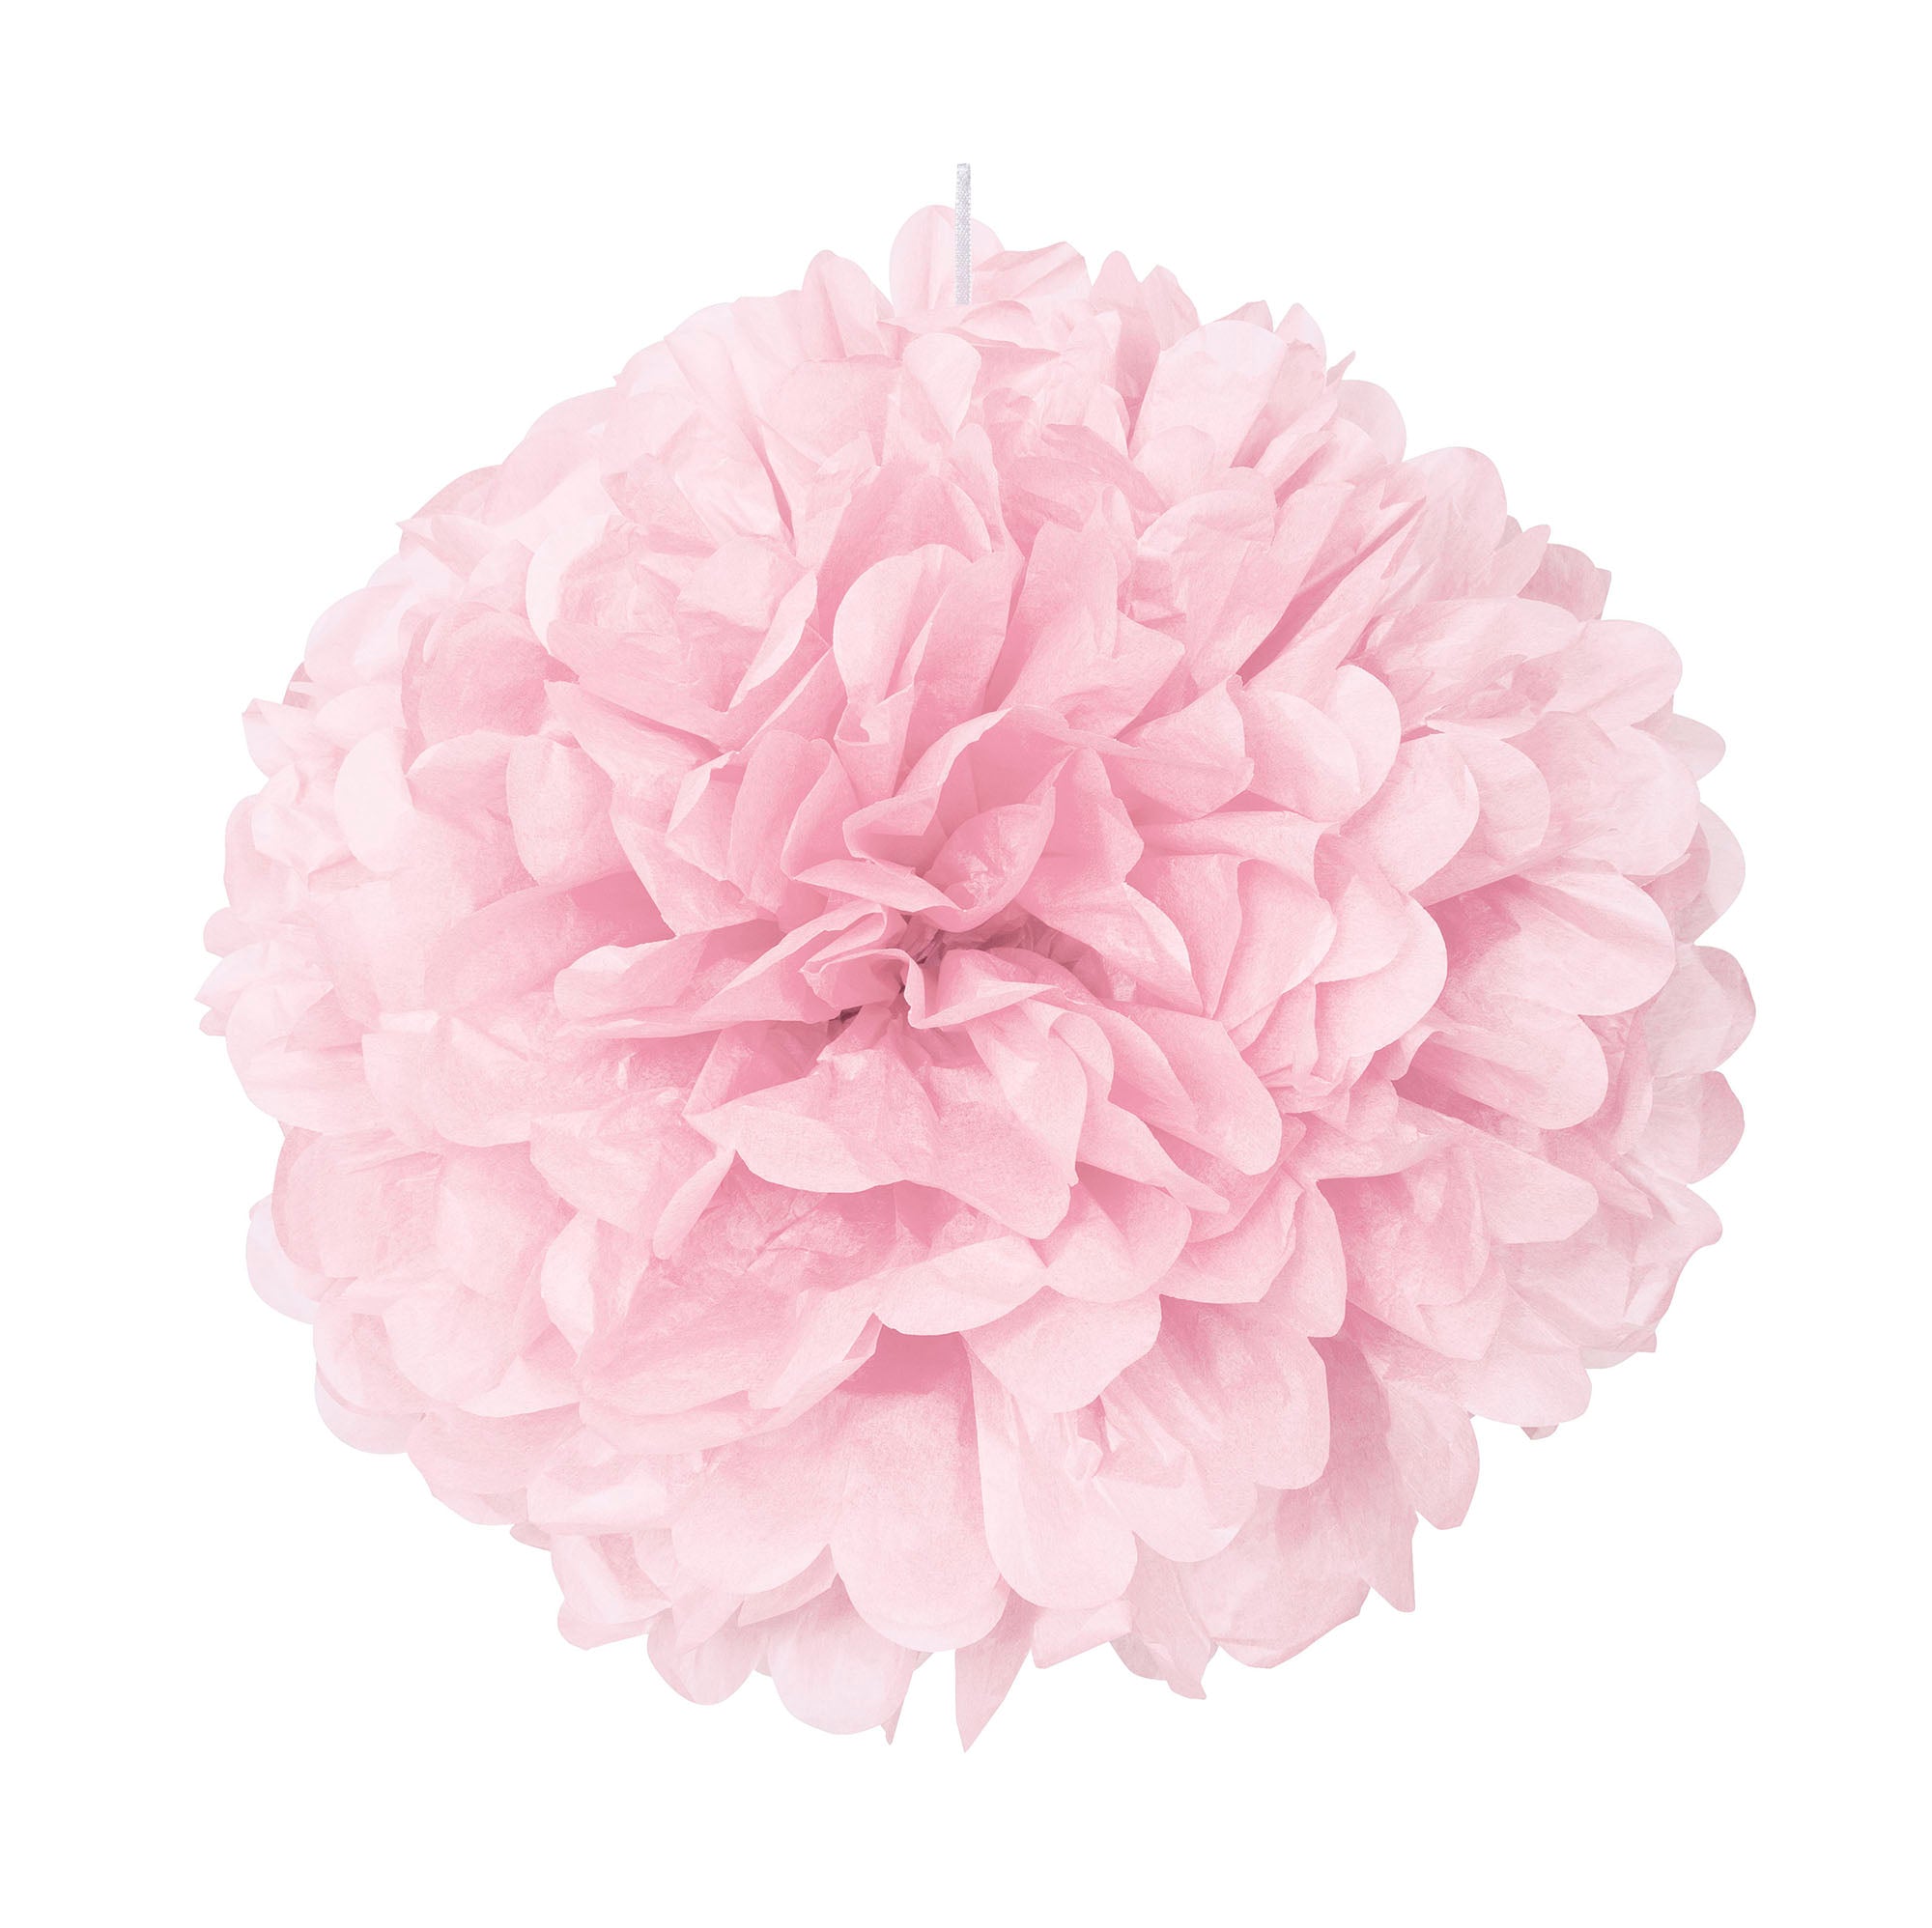 Puff Ball Lovely Pink Tissue 16in